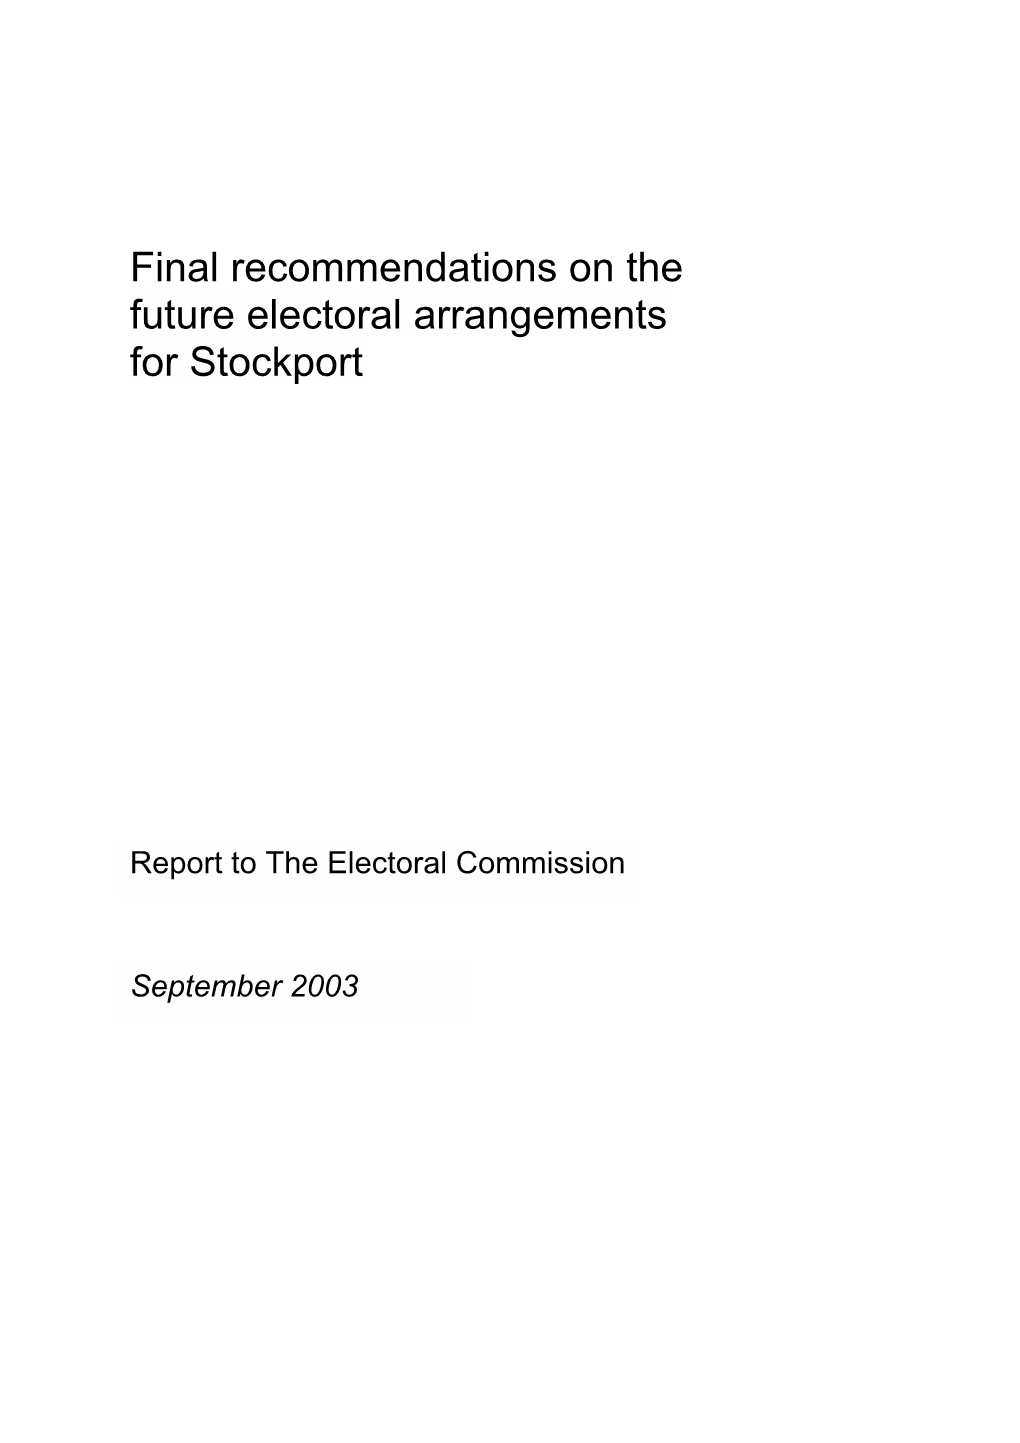 Final Recommendations on the Future Electoral Arrangements for Stockport